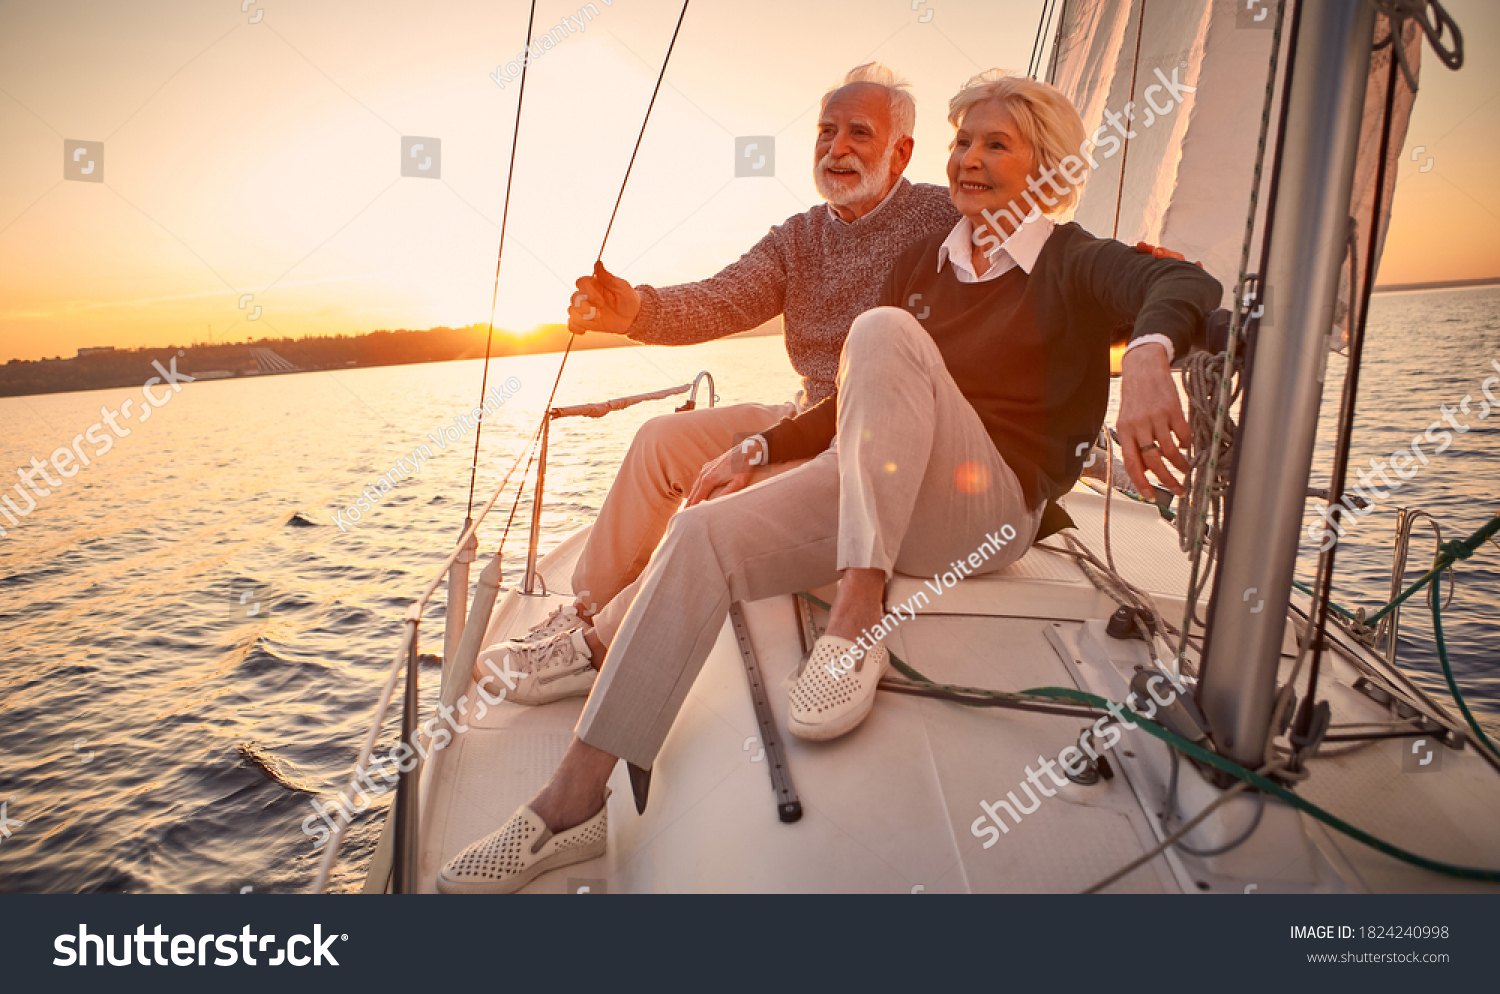 Beautiful and happy senior couple in love sitting on the side of sailboat or yacht deck floating in sea at sunset and enjoying amazing view, sailing together #1824240998